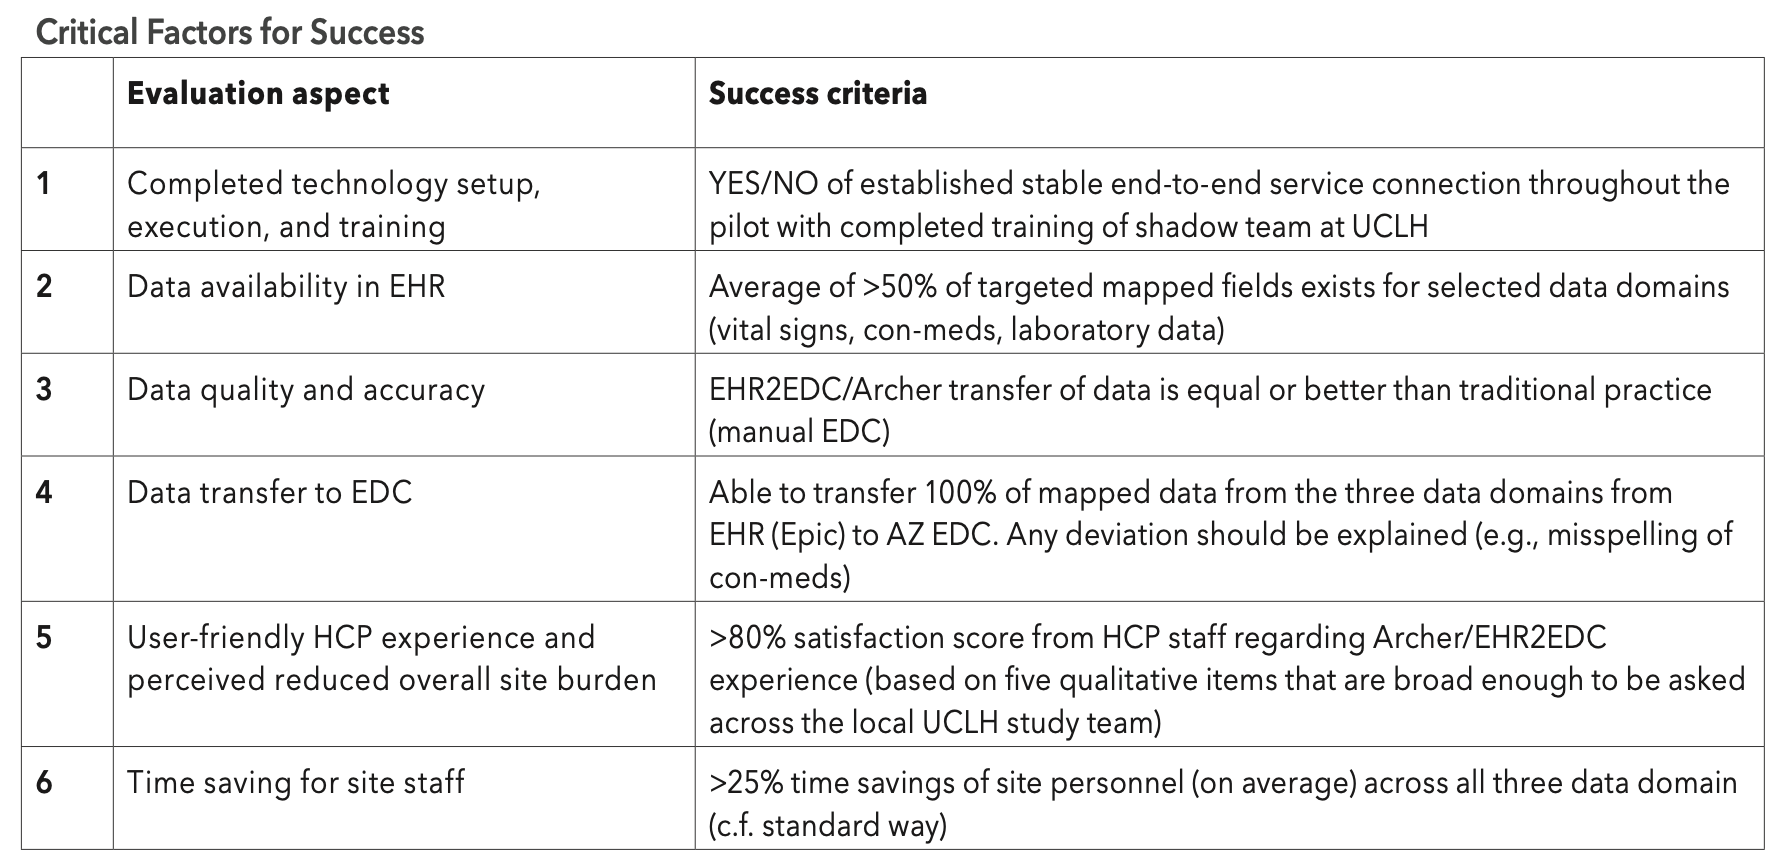 Table 1. The various aspects of project evaluation and their corresponding success measures.

Source: Sundgren et al.